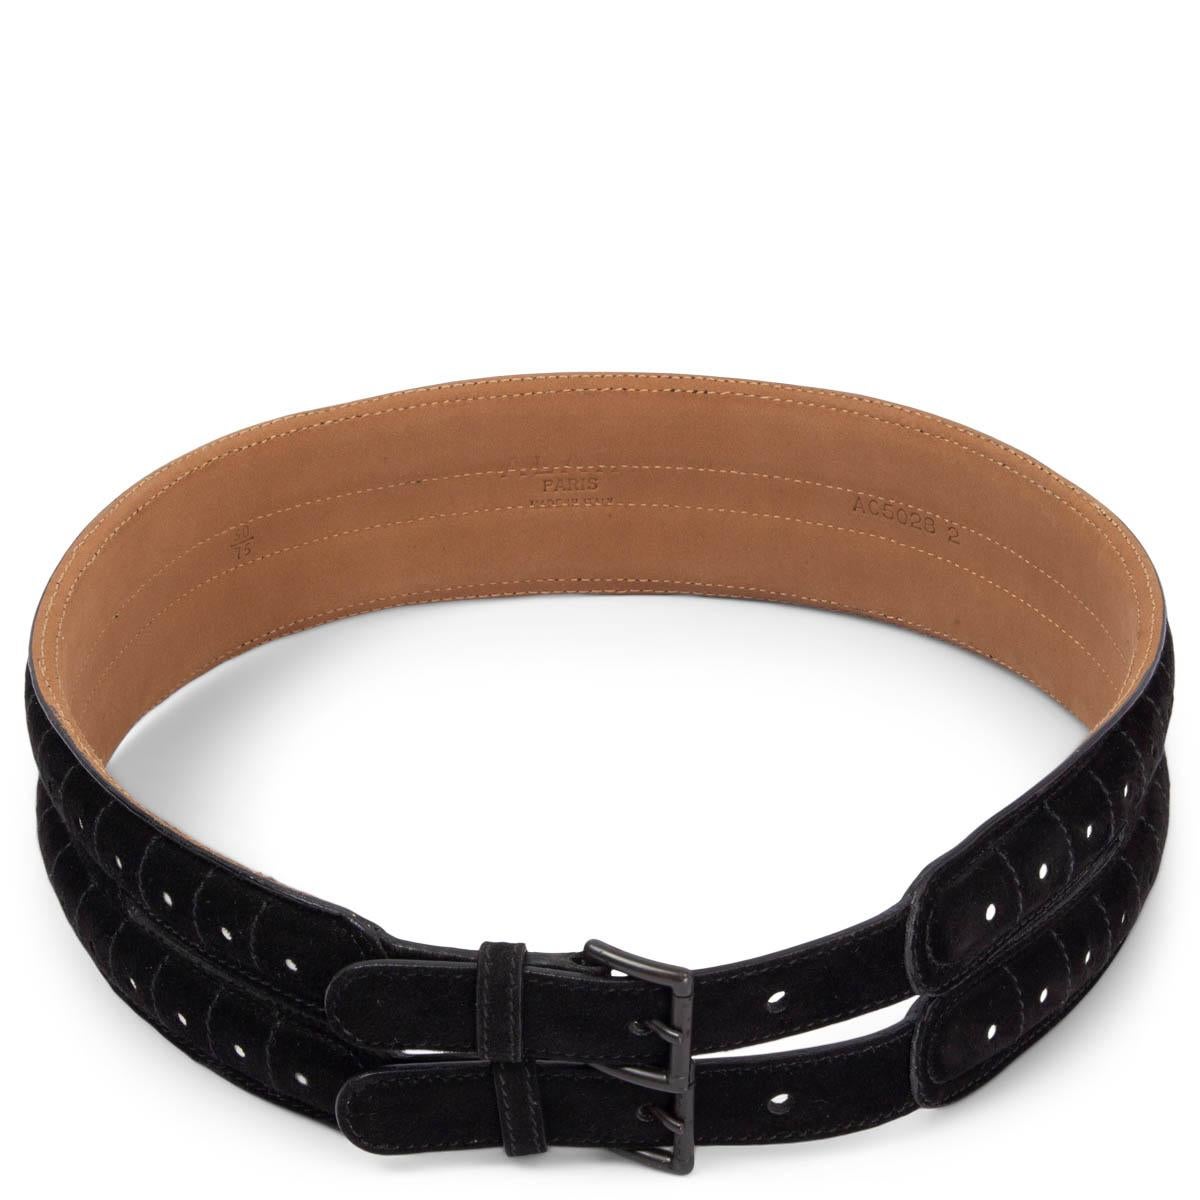 100% authentic Alaïa double strap waist belt in black suede leather with white cut-out dots. The design features gunmetal buckles. Has been worn and is in excellent condition. 

Measurements
Tag Size	75
Width	6cm (2.3in)
Fits	71cm (27.7in) to 76cm